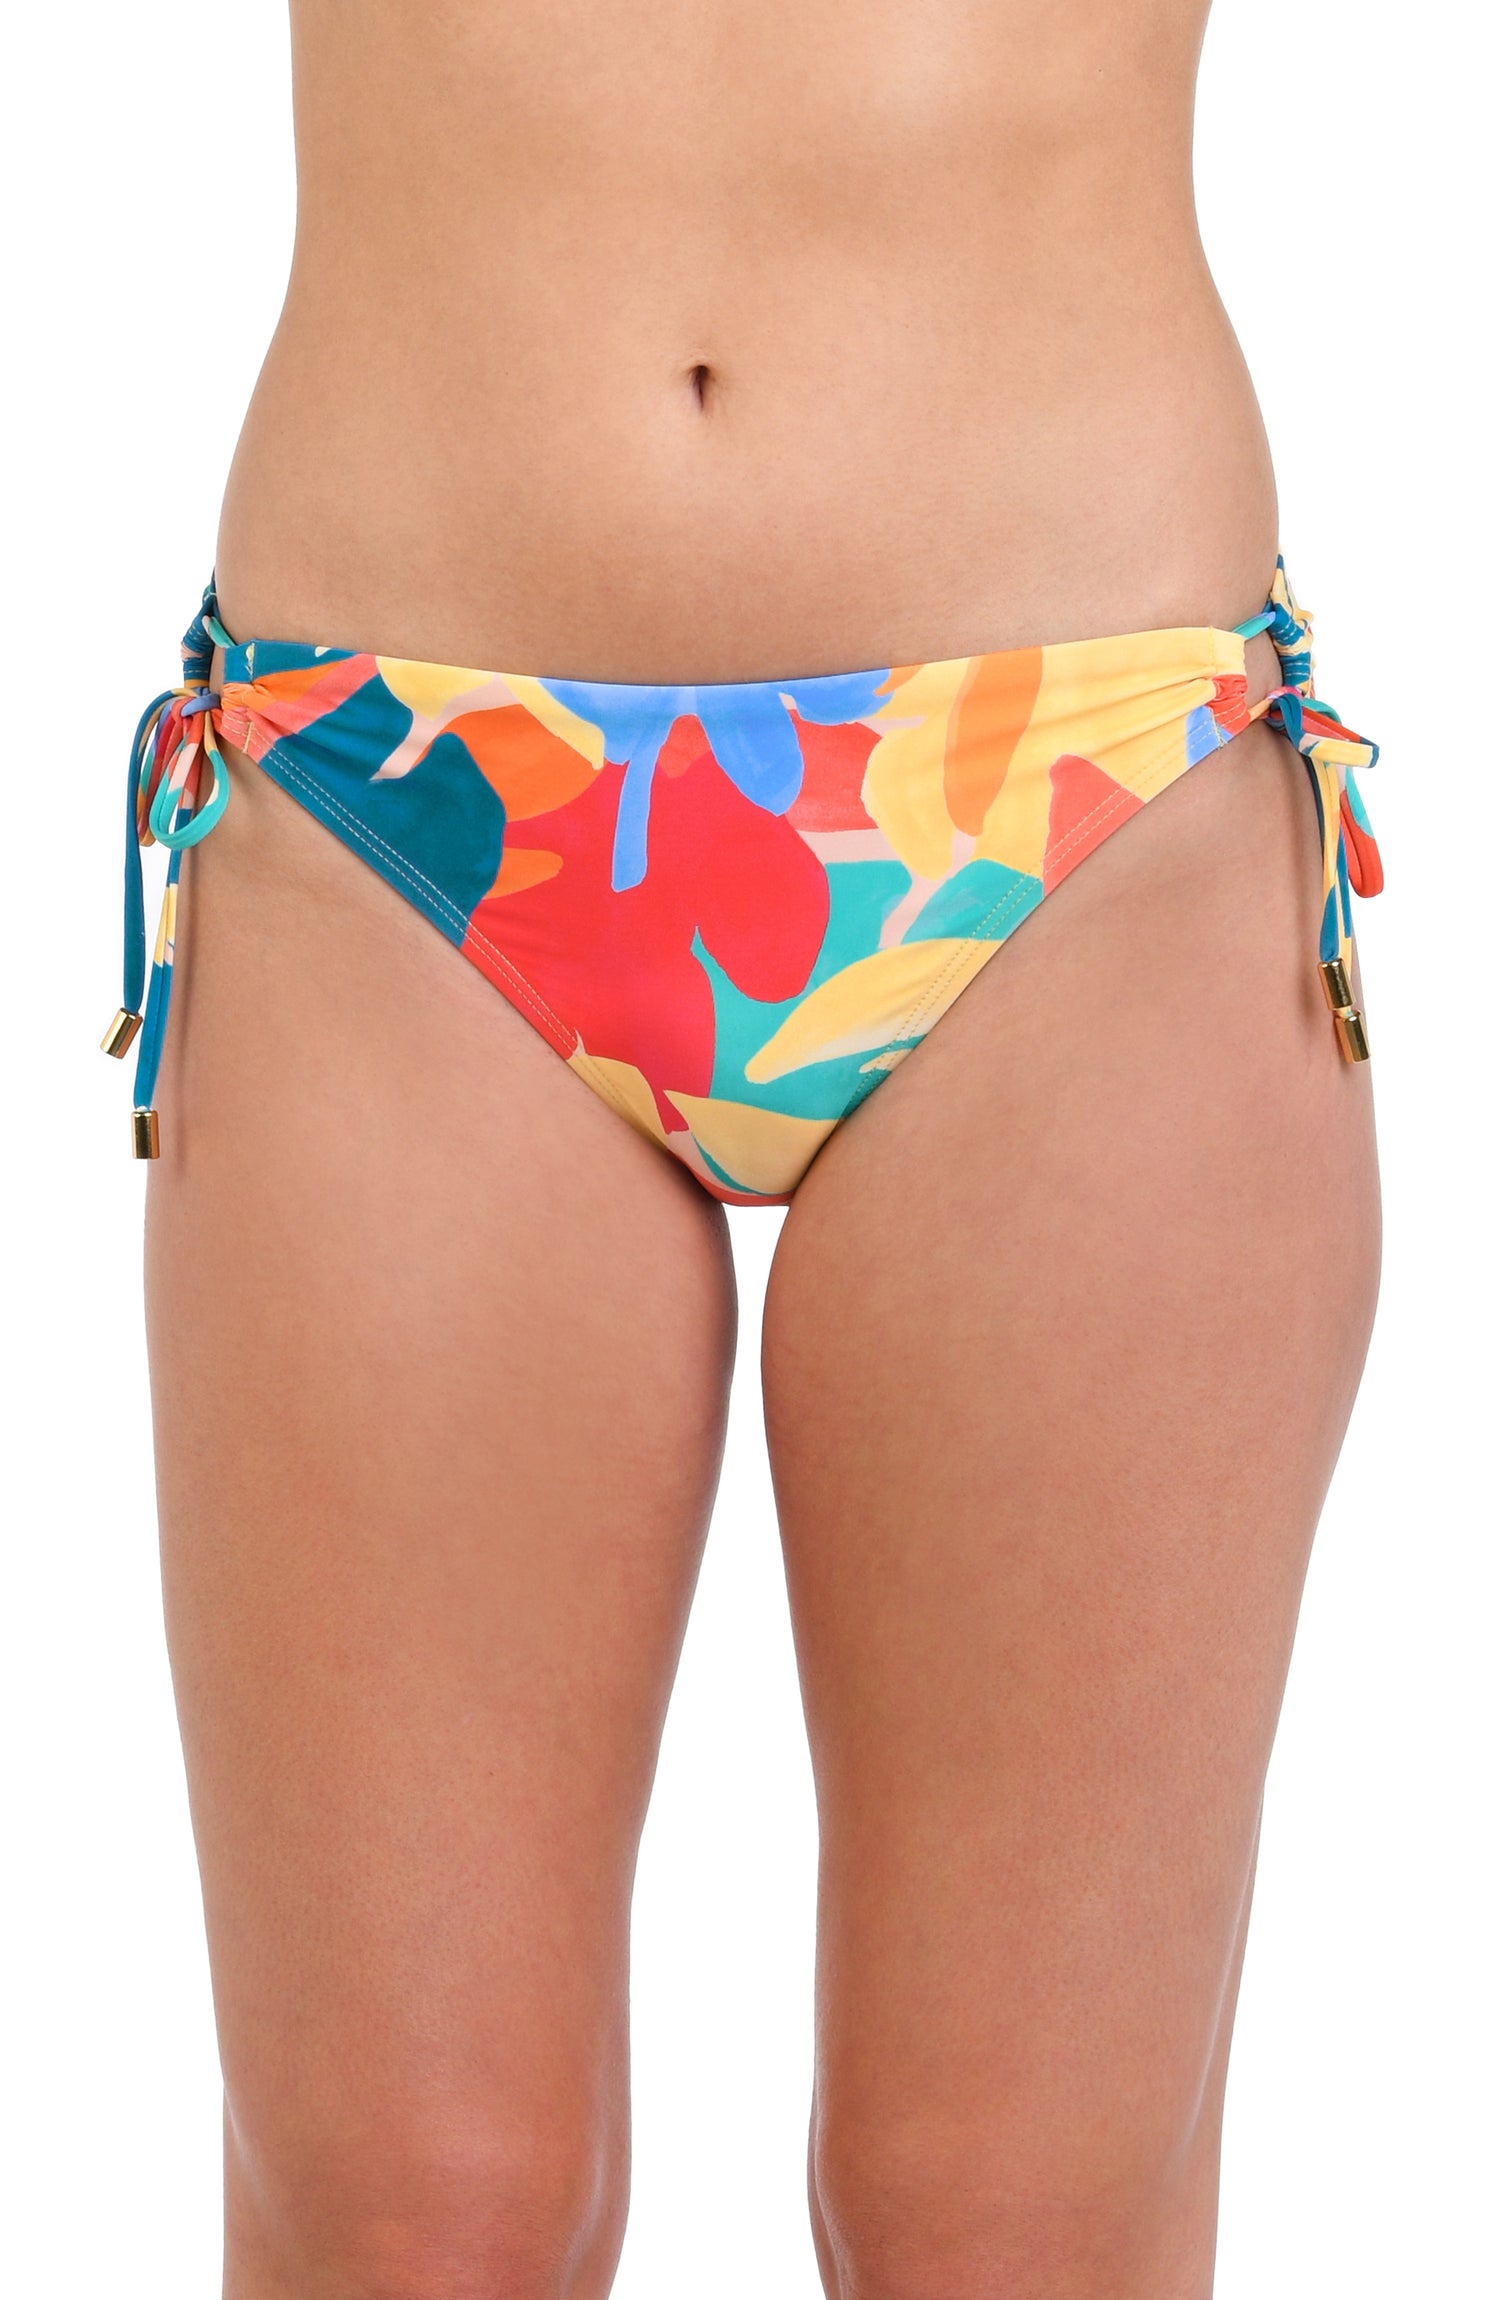 Model is wearing an orange, pink, blue, and aqua multicolored tropical patterned side tie hipster bikini bottom.